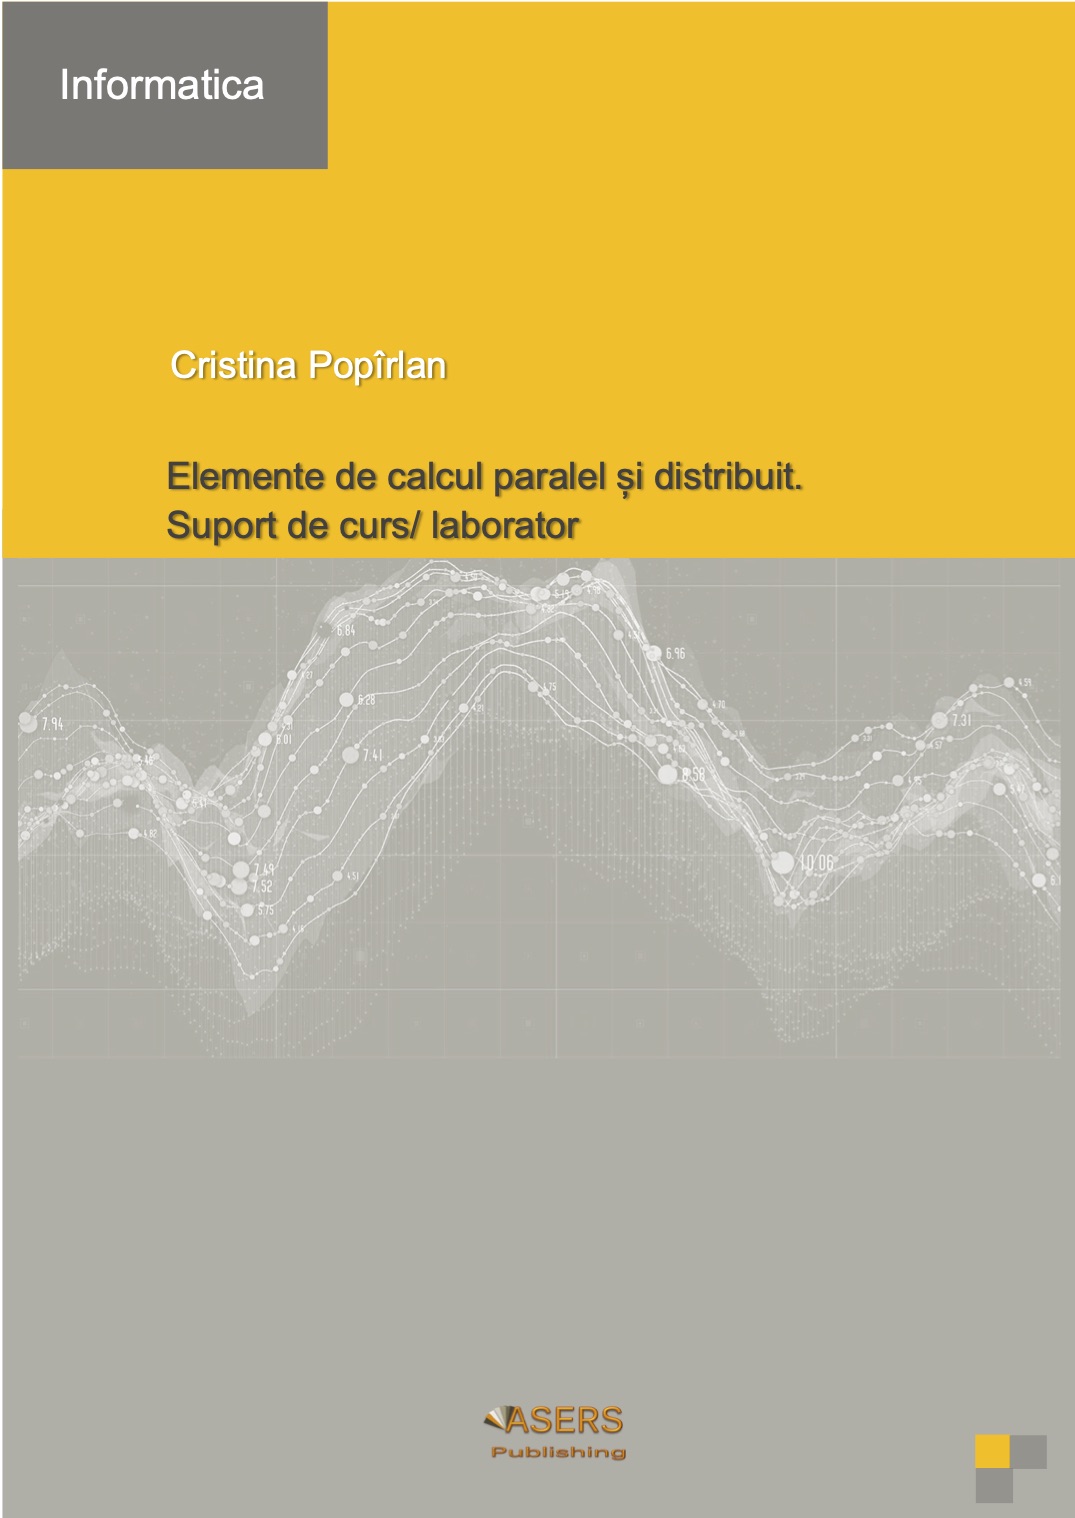 Elements of parallel and distributed computing. Course/laboratory support